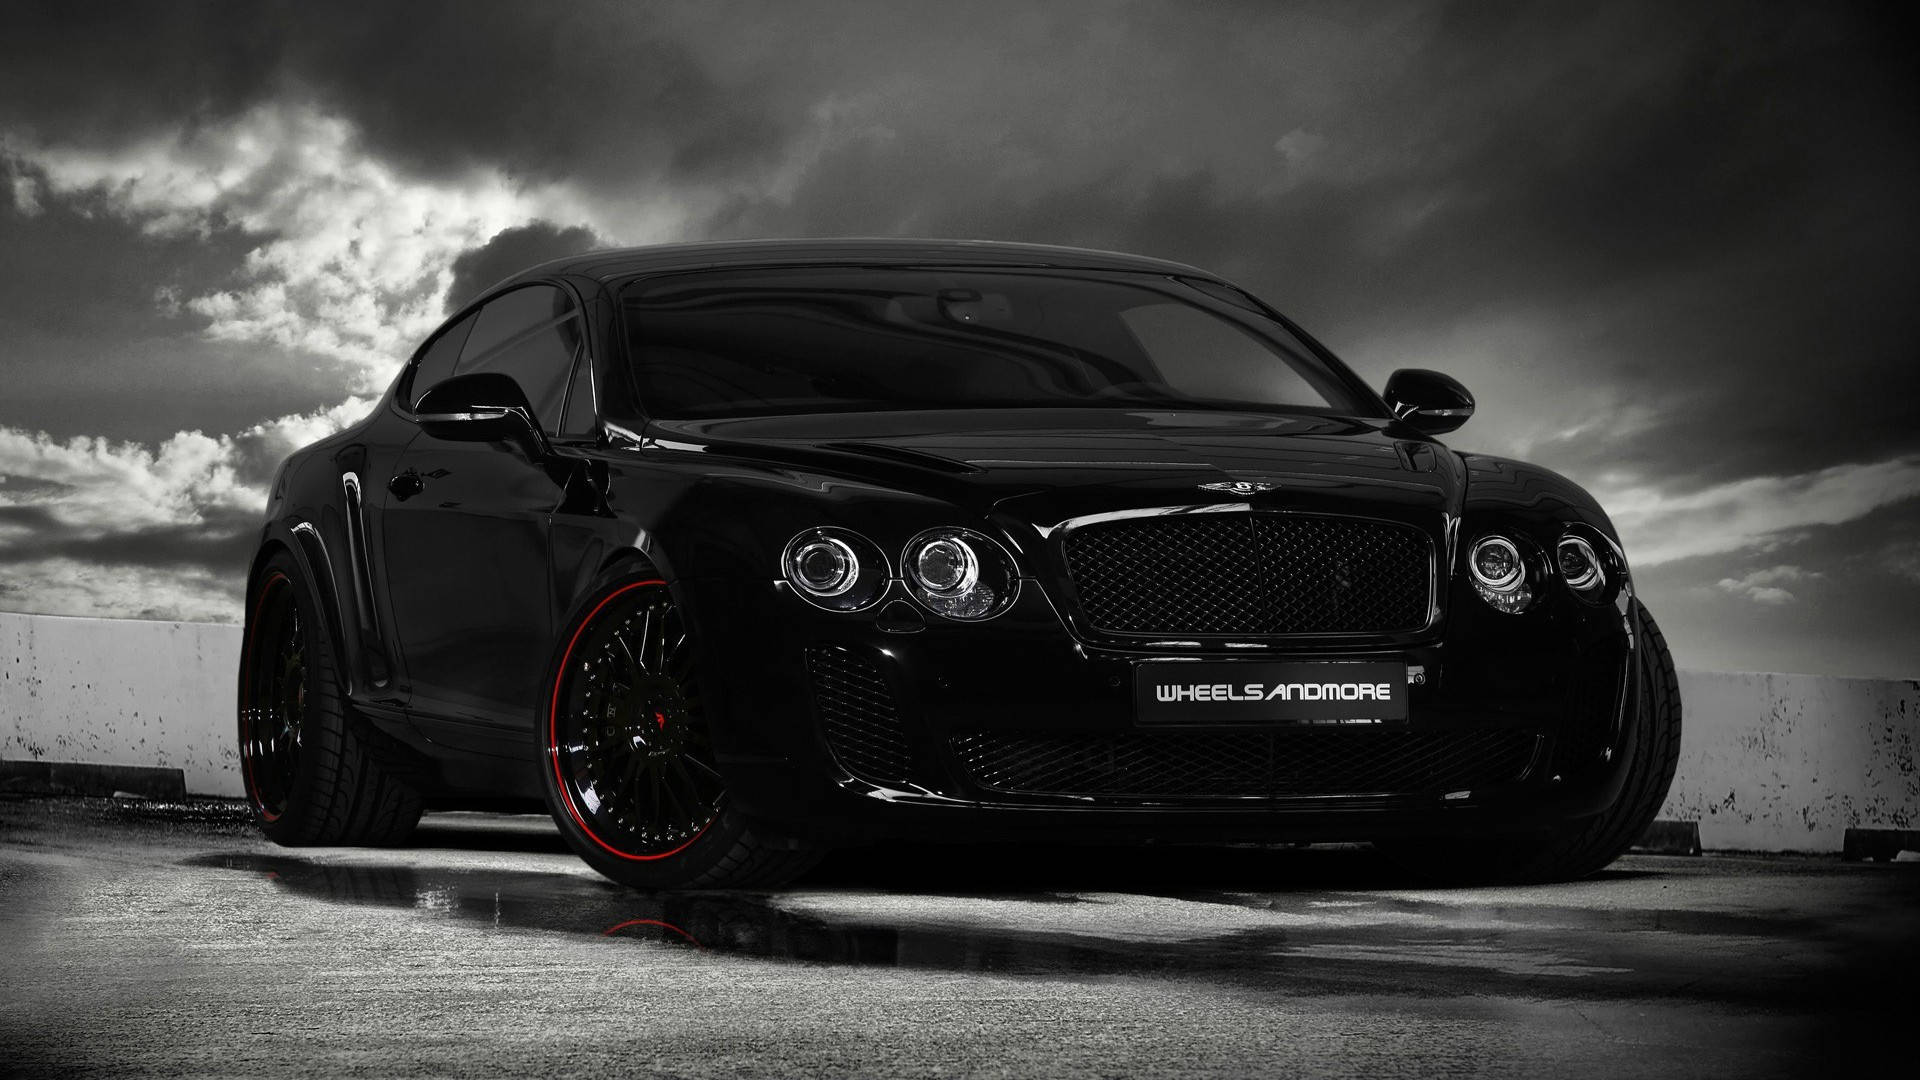 2010 Bentley Continental Black Sports Cars Background